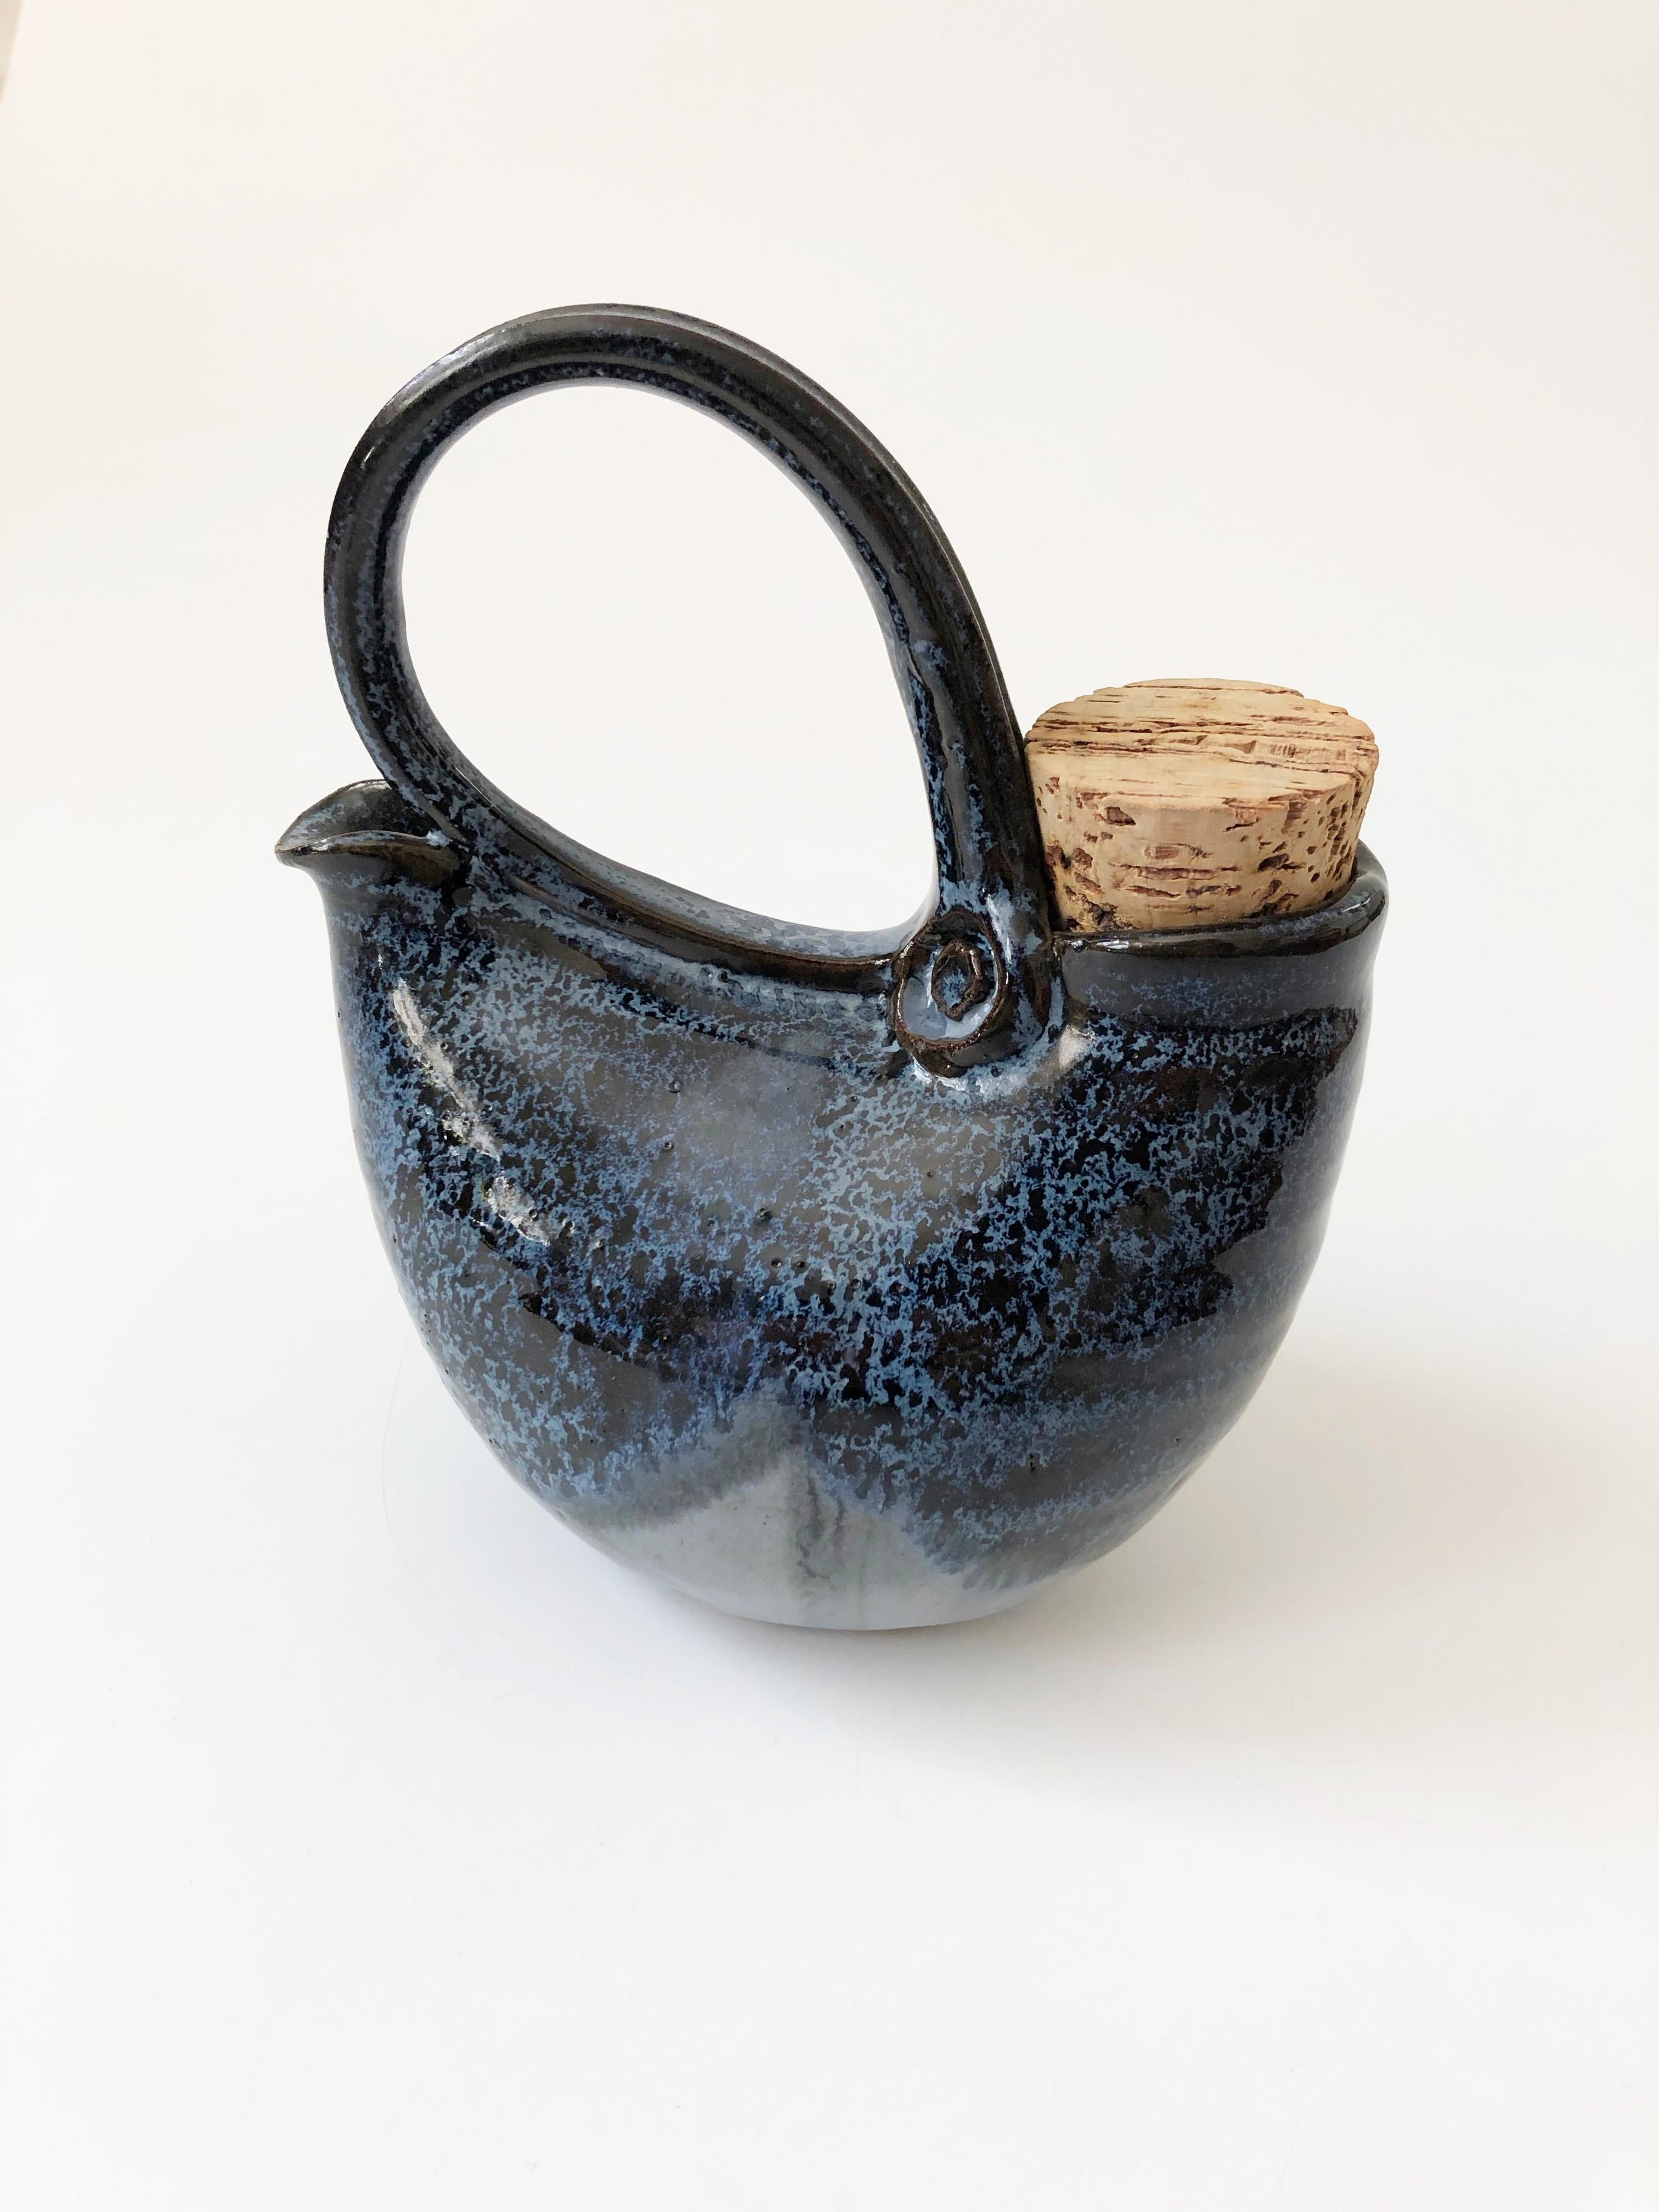 A vintage studio pottery teapot in a great unique handmade shape. Features a large curved handle that leads from spout to the filling hole that is plugged by a cork. Nice round shape, finished in an earthy two toned blue glaze. A great sculptural